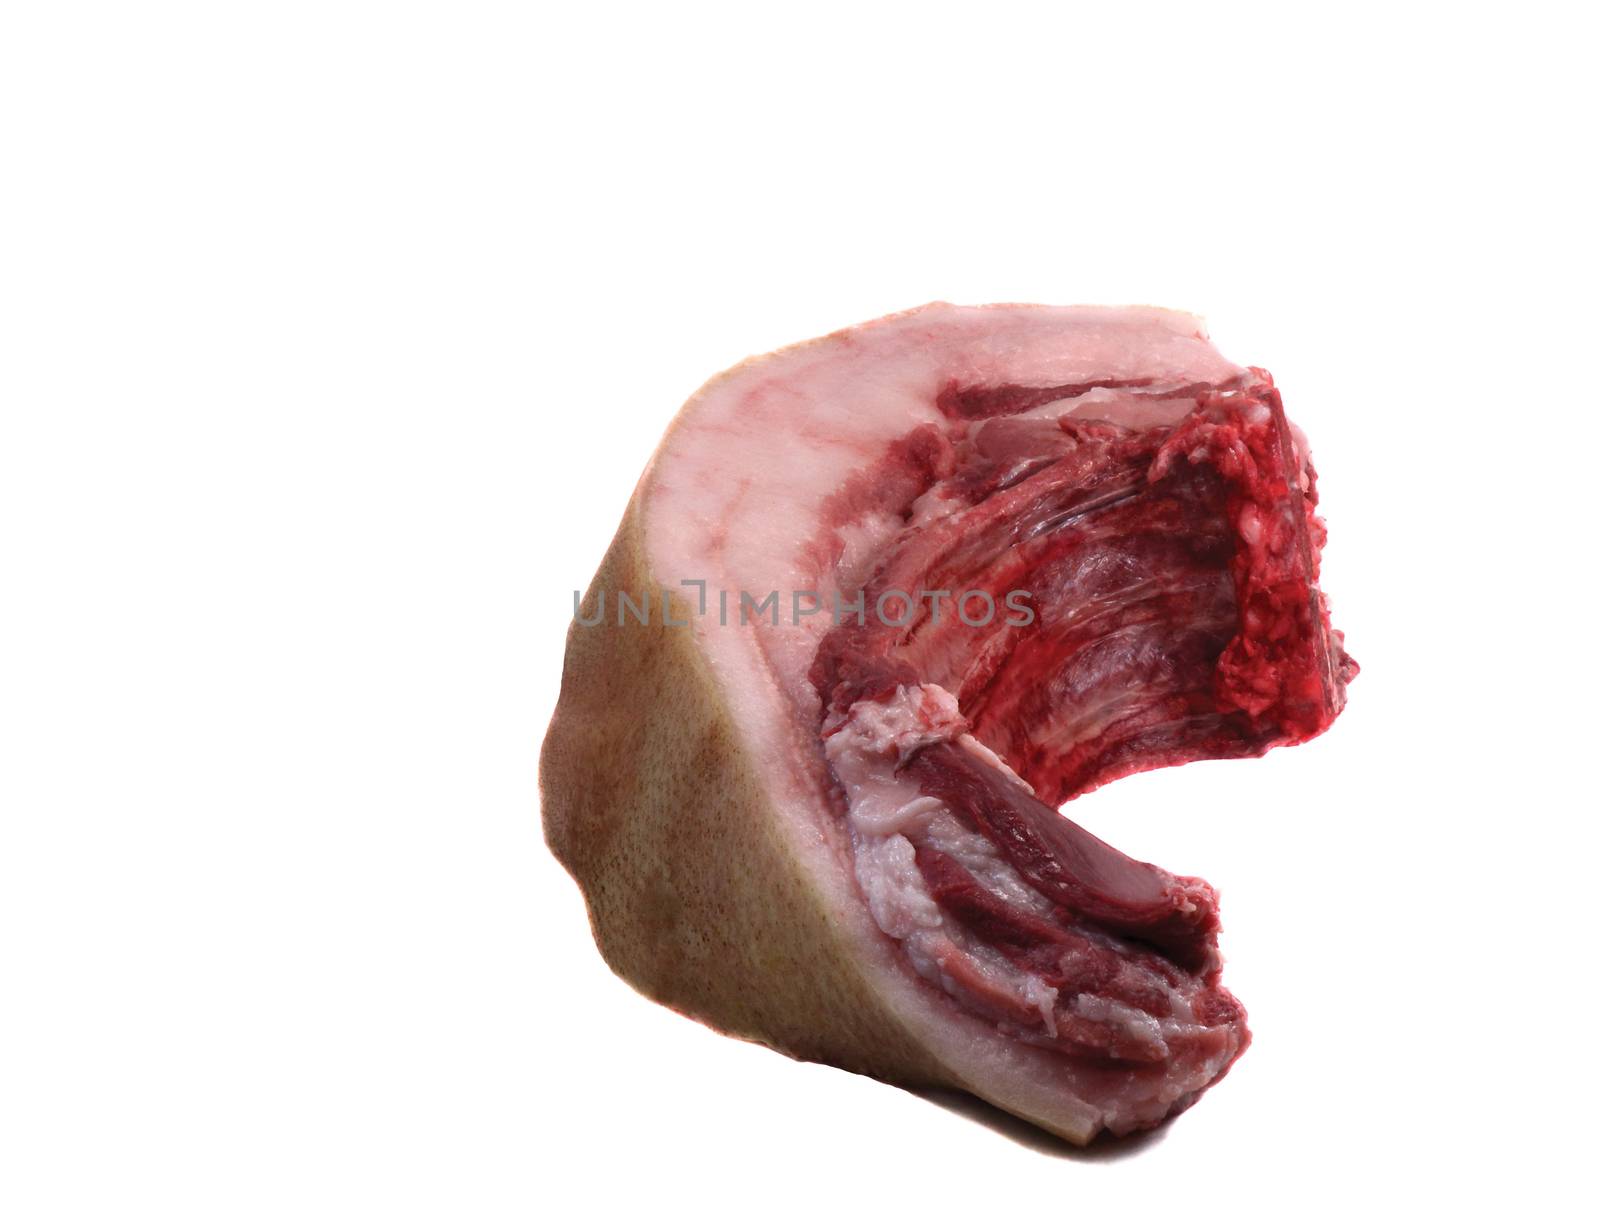 A large piece of raw pork meat on a white background. by georgina198